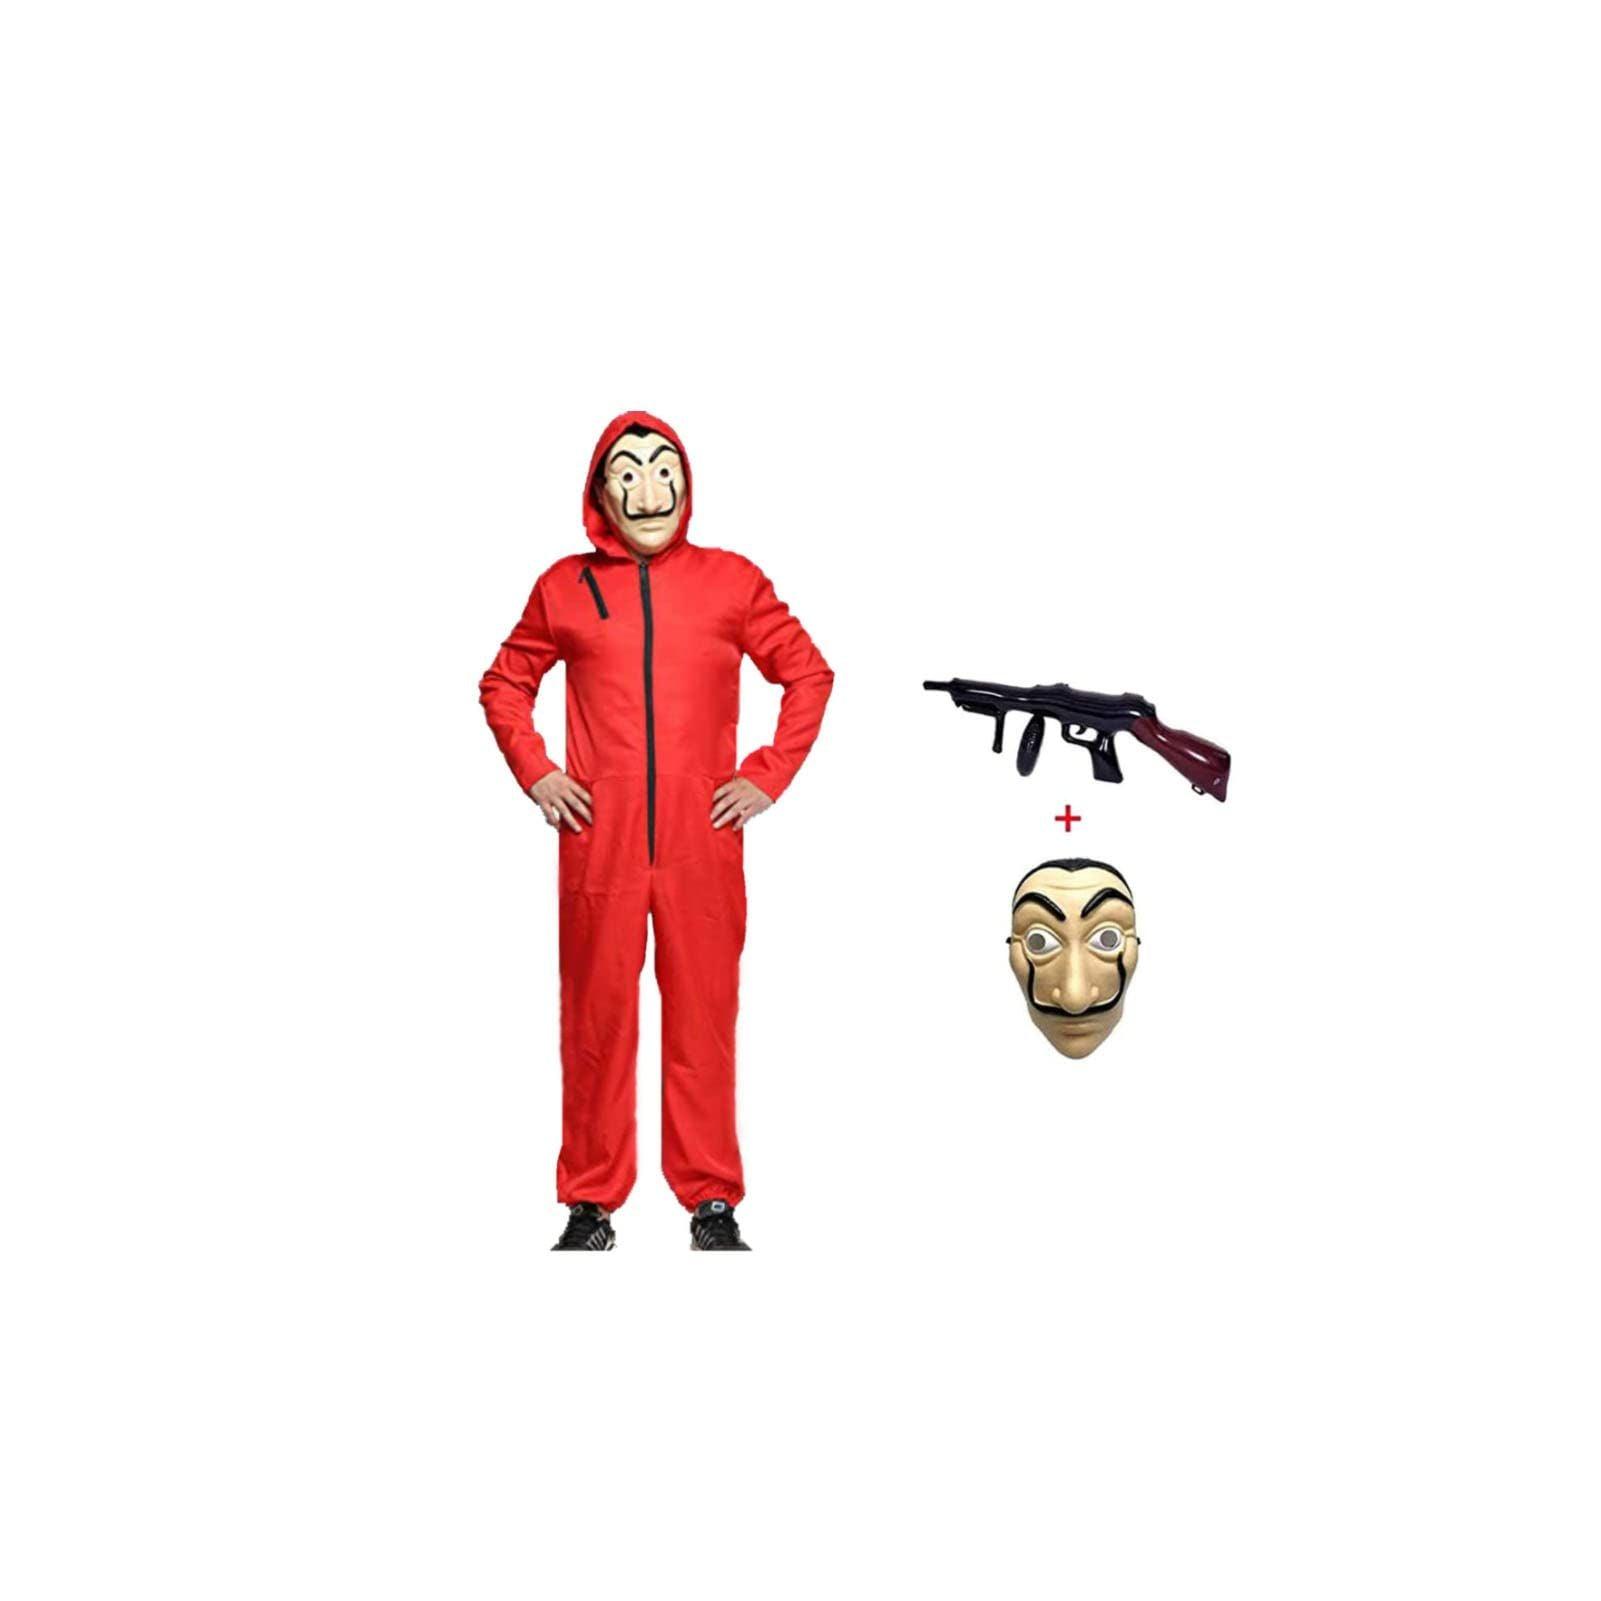 Anxicer Halloween Costume Bank Robber Jumpsuit for Carnival Thief Costume Jumpsuit Red Long Sleeve Romper with Hood, Cosplay Set Mask and Machine Gun Carnival Costume (Adult-S)